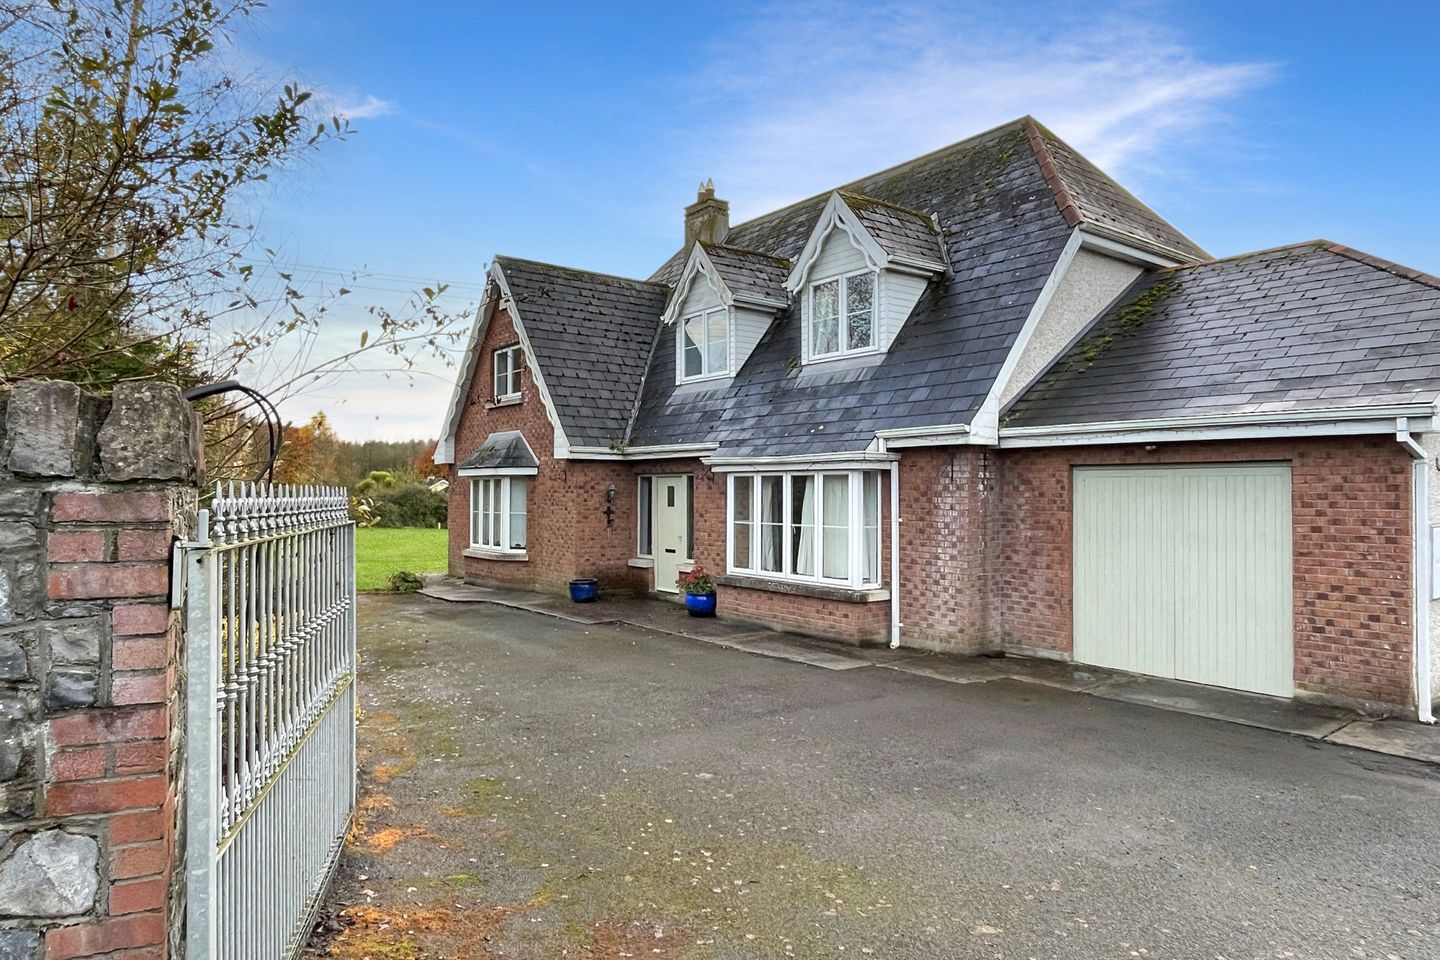 Forge Road, Castleconnell, Co. Limerick, V94Y6T2